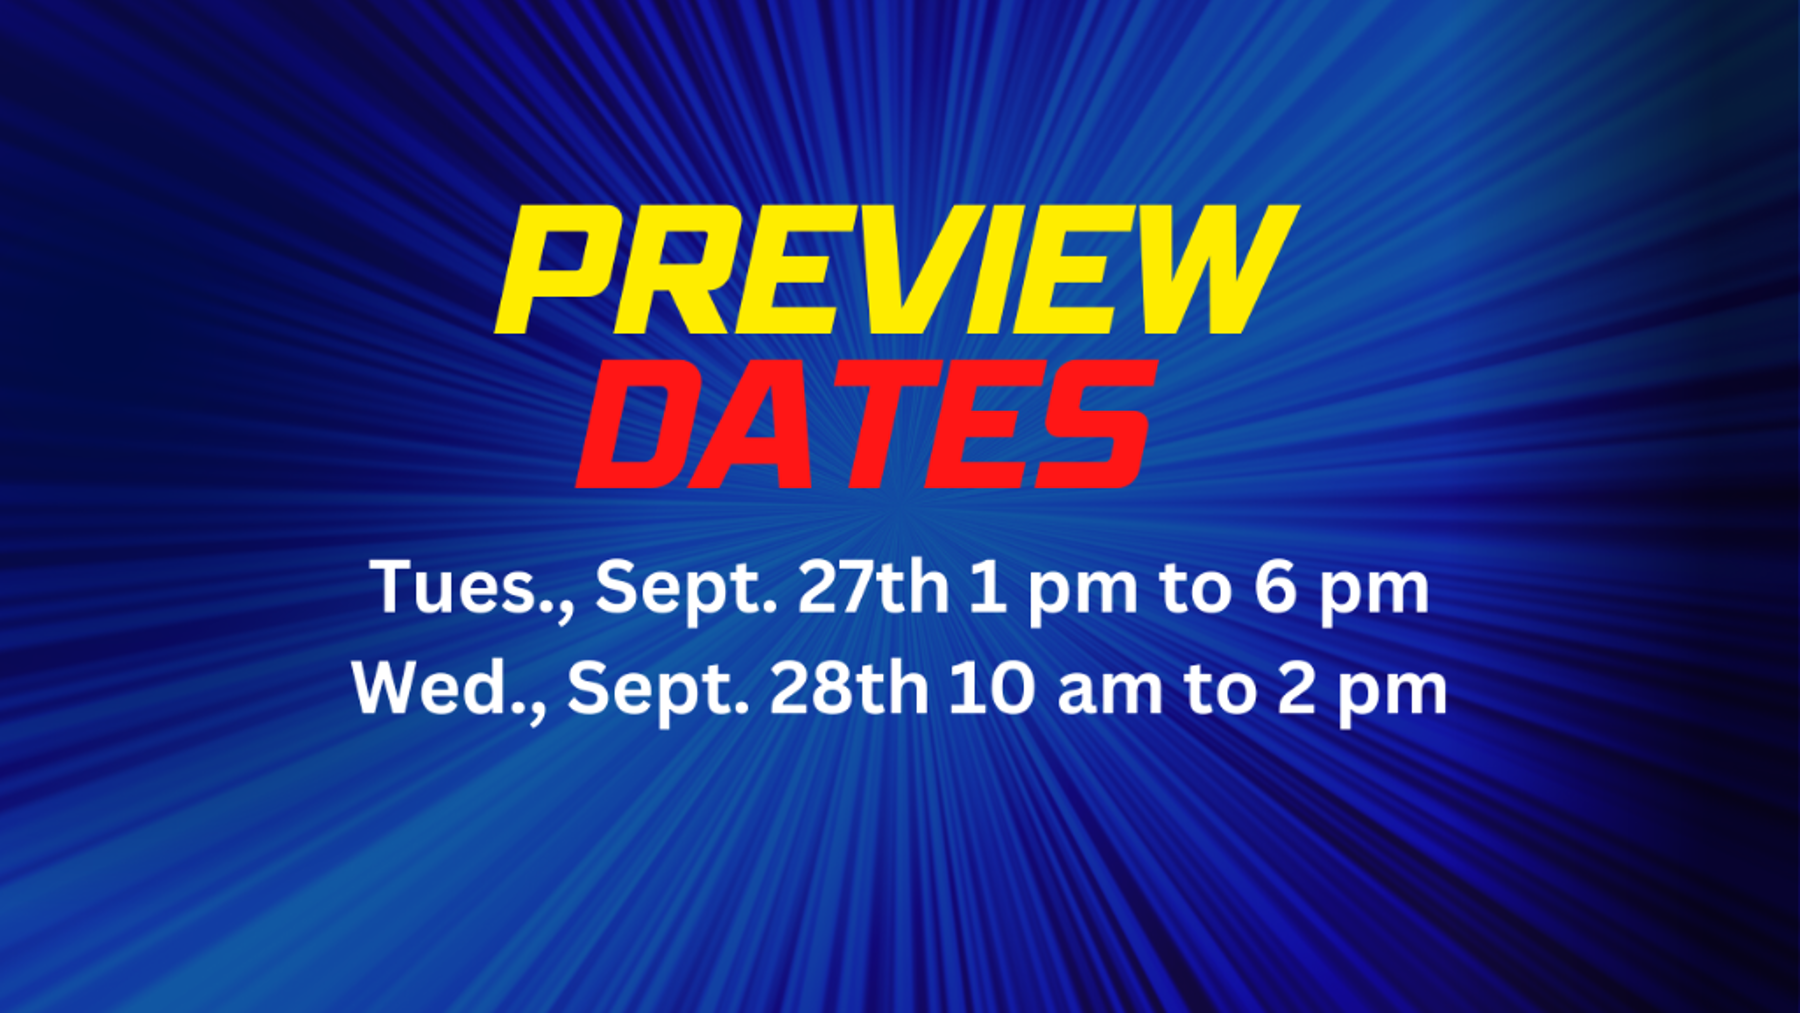 Image for PREVIEW DATES